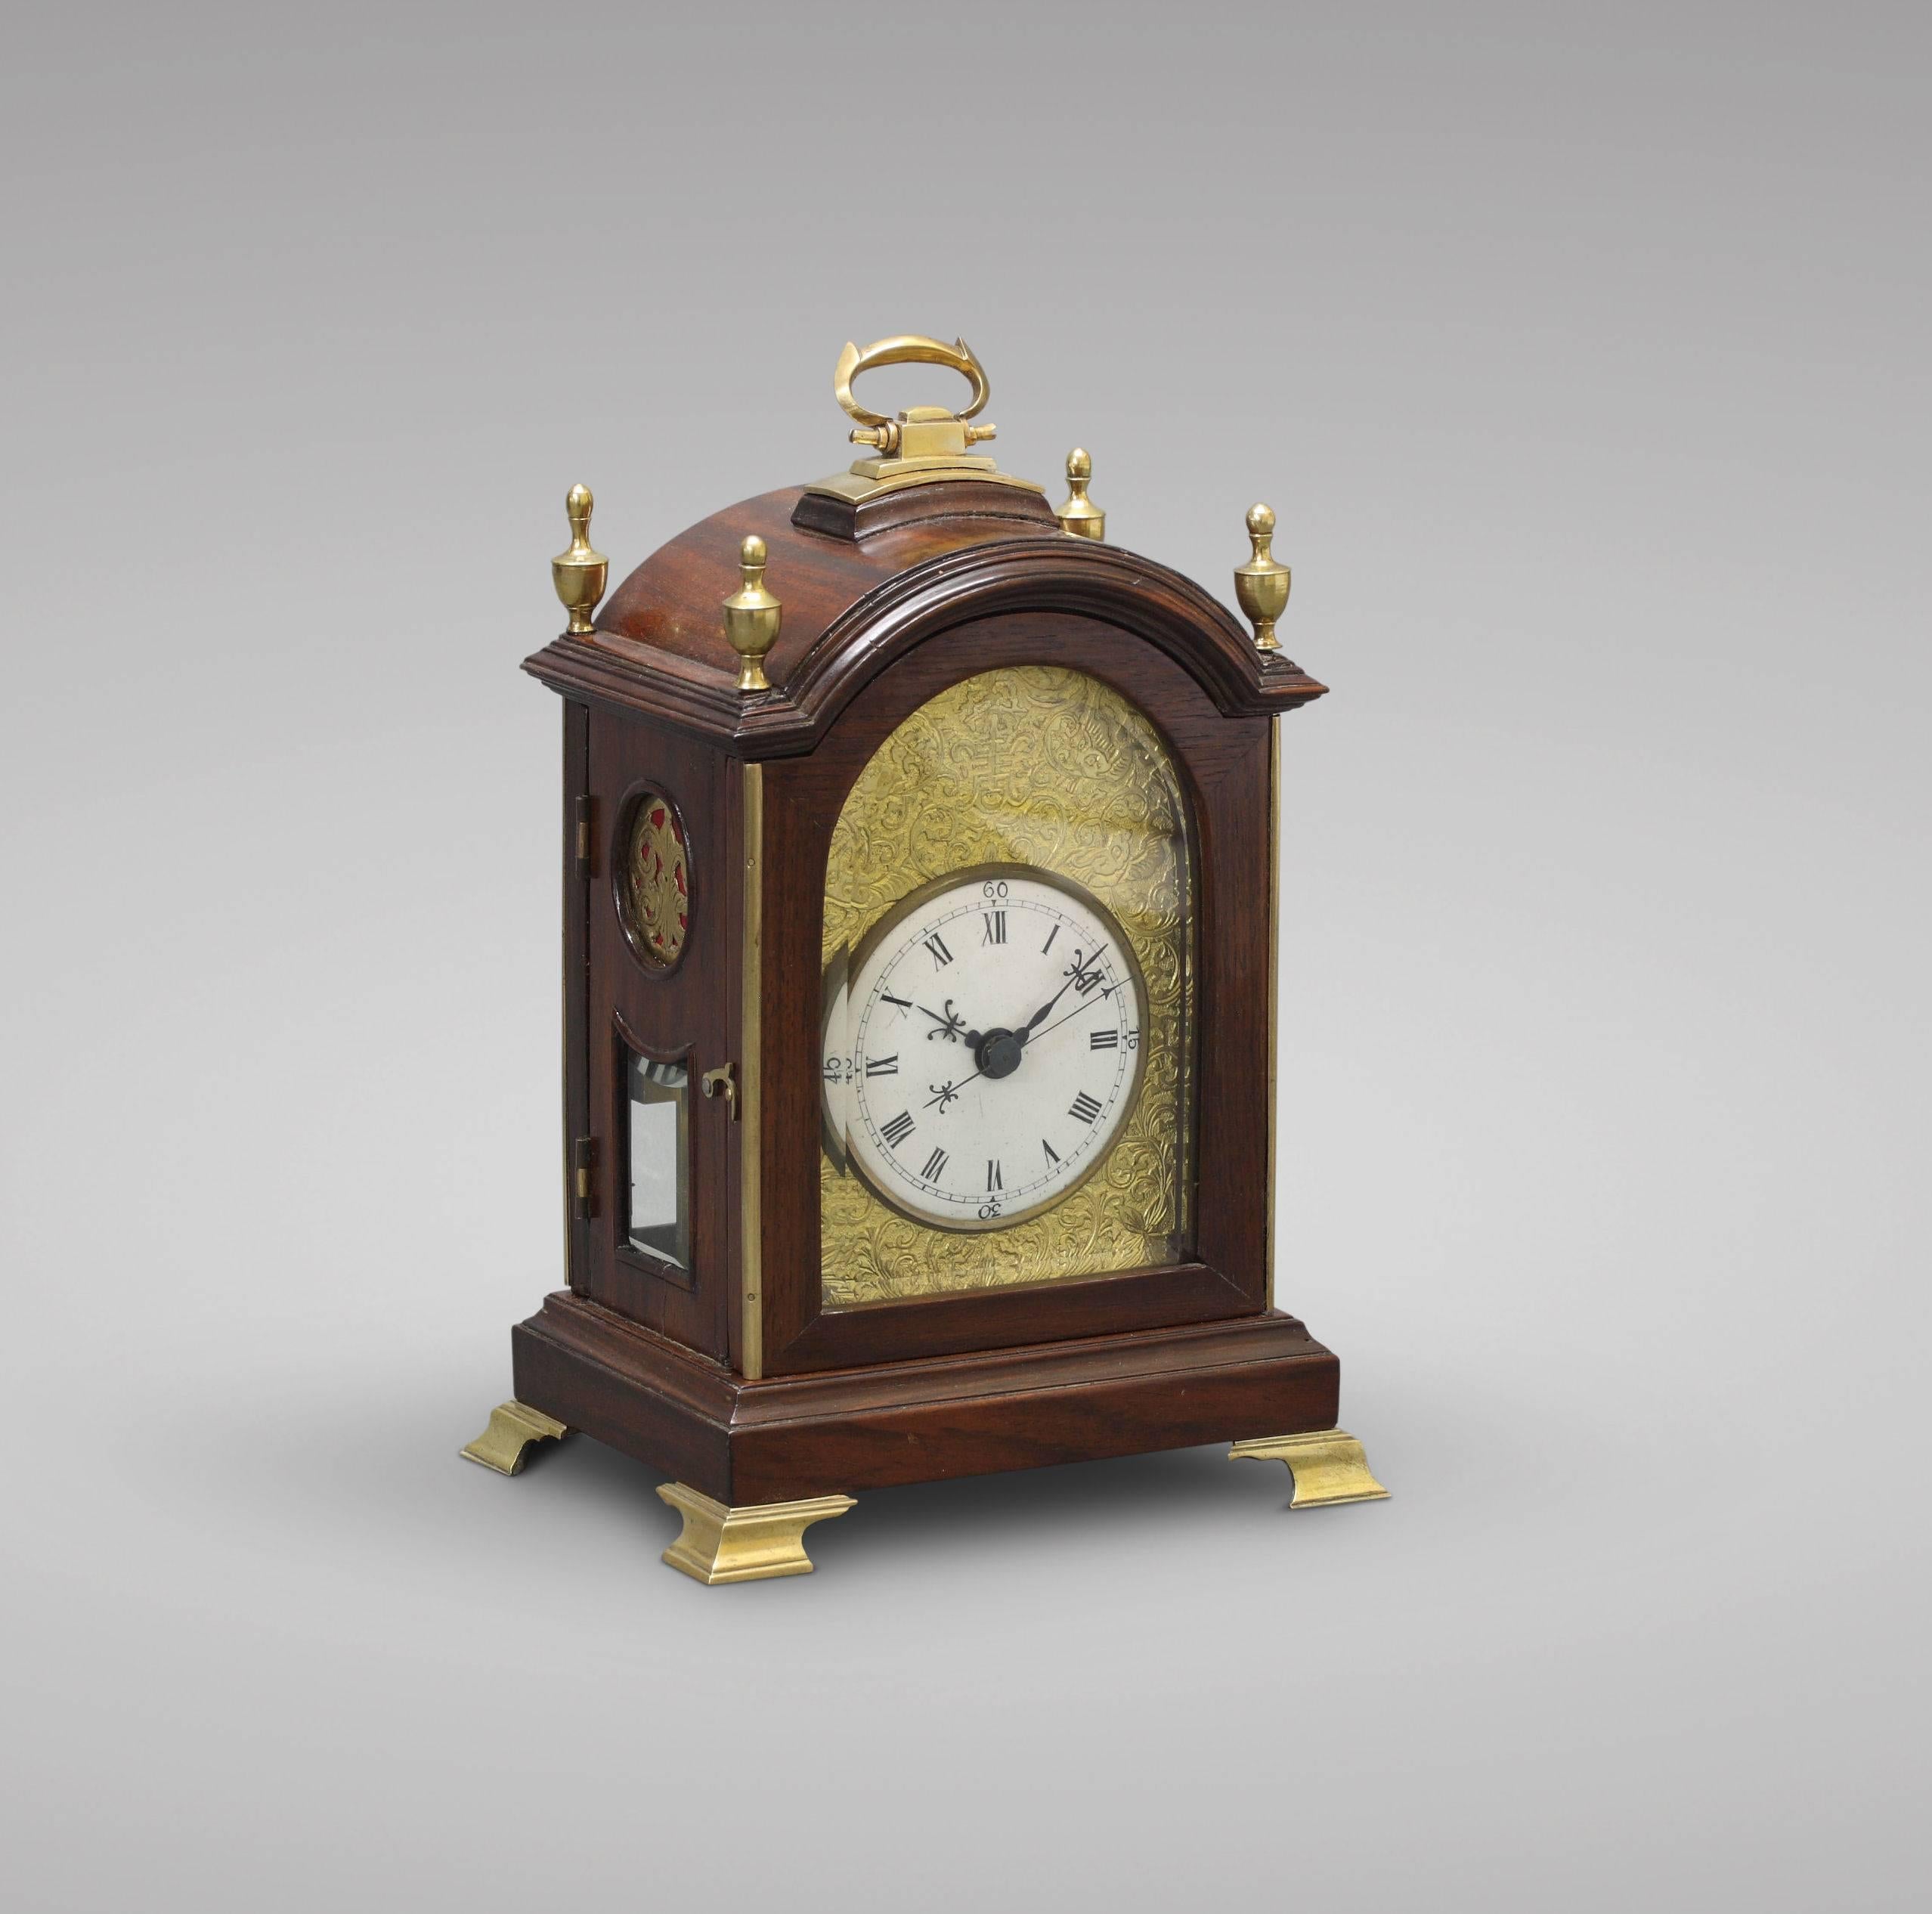 Small Chinese bracket clock for the export market, first half of the 19th century.

Twin-barreled square movement, verge escapement with suspension pivoted at the front and knife-edged at the rear. Hands setting through an ingenious spring-loaded